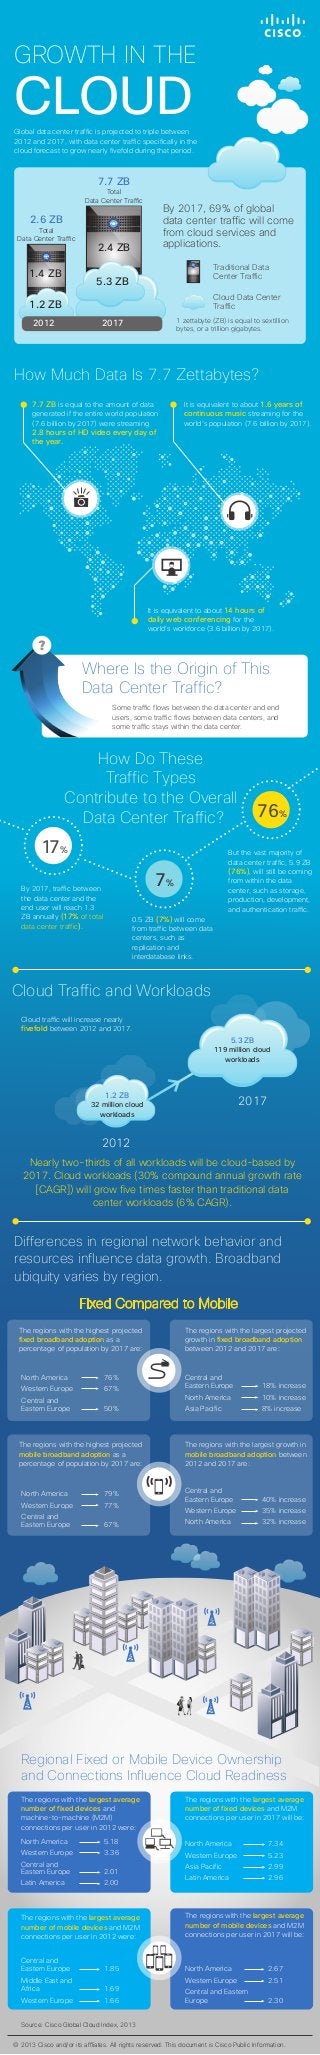 GROWTH IN THE

CLOUD

Global data center traffic is projected to triple between
2012 and 2017, with data center traffic specifically in the
cloud forecast to grow nearly fivefold during that period.

7.7 ZB

Total
Data Center Traffic

By 2017, 69% of global
data center traffic will come
from cloud services and
applications.

2.6 ZB

Total
Data Center Traffic

1.4 ZB

2.4 ZB

Traditional Data
Center Traffic

5.3 ZB

Cloud Data Center
Traffic

1.2 ZB
2012

1 zettabyte (ZB) is equal to sextillion
bytes, or a trillion gigabytes.

2017

How Much Data Is 7.7 Zettabytes?
7.7 ZB is equal to the amount of data
generated if the entire world population
(7.6 billion by 2017) were streaming

2.8 hours of HD video every day of
the year.

It is equivalent to about 1.6 years of
continuous music streaming for the
world’s population (7.6 billion by 2017).

It is equivalent to about 14 hours of
daily web conferencing for the
world’s workforce (3.6 billion by 2017).

Where Is the Origin of This
Data Center Traffic?
Some traffic flows between the data center and end
users, some traffic flows between data centers, and
some traffic stays within the data center.

How Do These
Traffic Types
Contribute to the Overall
Data Center Traffic?

17%

But the vast majority of
data center traffic, 5.9 ZB
(76%), will still be coming
from within the data
center, such as storage,
production, development,
and authentication traffic.

7%

By 2017, traffic between
the data center and the
end user will reach 1.3
ZB annually (17% of total
data center traffic).

76%

0.5 ZB (7%) will come
from traffic between data
centers, such as
replication and
interdatabase links.

Cloud Traffic and Workloads
Cloud traffic will increase nearly
fivefold between 2012 and 2017.

5.3 ZB
119 million cloud
workloads

1.2 ZB

2017

32 million cloud
workloads

2012
Nearly two-thirds of all workloads will be cloud-based by
2017. Cloud workloads (30% compound annual growth rate
[CAGR]) will grow five times faster than traditional data
center workloads (6% CAGR).

Differences in regional network behavior and
resources influence data growth. Broadband
ubiquity varies by region.
Fixed Compared to Mobile
The regions with the highest projected
fixed broadband adoption as a
percentage of population by 2017 are:

The regions with the largest projected
growth in fixed broadband adoption
between 2012 and 2017 are:

67%

Central and
Eastern Europe

18% increase

North America

10% increase

50%

Asia Pacific

8% increase

North America

76%

Western Europe
Central and
Eastern Europe

The regions with the highest projected
mobile broadband adoption as a
percentage of population by 2017 are:

North America

79%

Western Europe

77%

Central and
Eastern Europe

67%

The regions with the largest growth in
mobile broadband adoption between
2012 and 2017 are:

Central and
Eastern Europe

40% increase

Western Europe

35% increase

North America

32% increase

Regional Fixed or Mobile Device Ownership
and Connections Influence Cloud Readiness
The regions with the largest average
number of fixed devices and
machine-to-machine (M2M)
connections per user in 2012 were:

The regions with the largest average
number of fixed devices and M2M
connections per user in 2017 will be:

North America

5.18

Western Europe

3.36

North America

7.34

Western Europe

5.23

Central and
Eastern Europe

2.01

Asia Pacific

2.99

Latin America

2.00

Latin America

2.96

The regions with the largest average
number of mobile devices and M2M
connections per user in 2012 were:

The regions with the largest average
number of mobile devices and M2M
connections per user in 2017 will be:

Central and
Eastern Europe

North America

2.67

Western Europe

2.51

Central and Eastern
Europe

2.30

1.85

Middle East and
Africa

1.69

Western Europe

1.66

Source: Cisco Global Cloud Index, 2013
© 2013 Cisco and/or its affliates. All rights reserved. This document is Cisco Public Information.

 